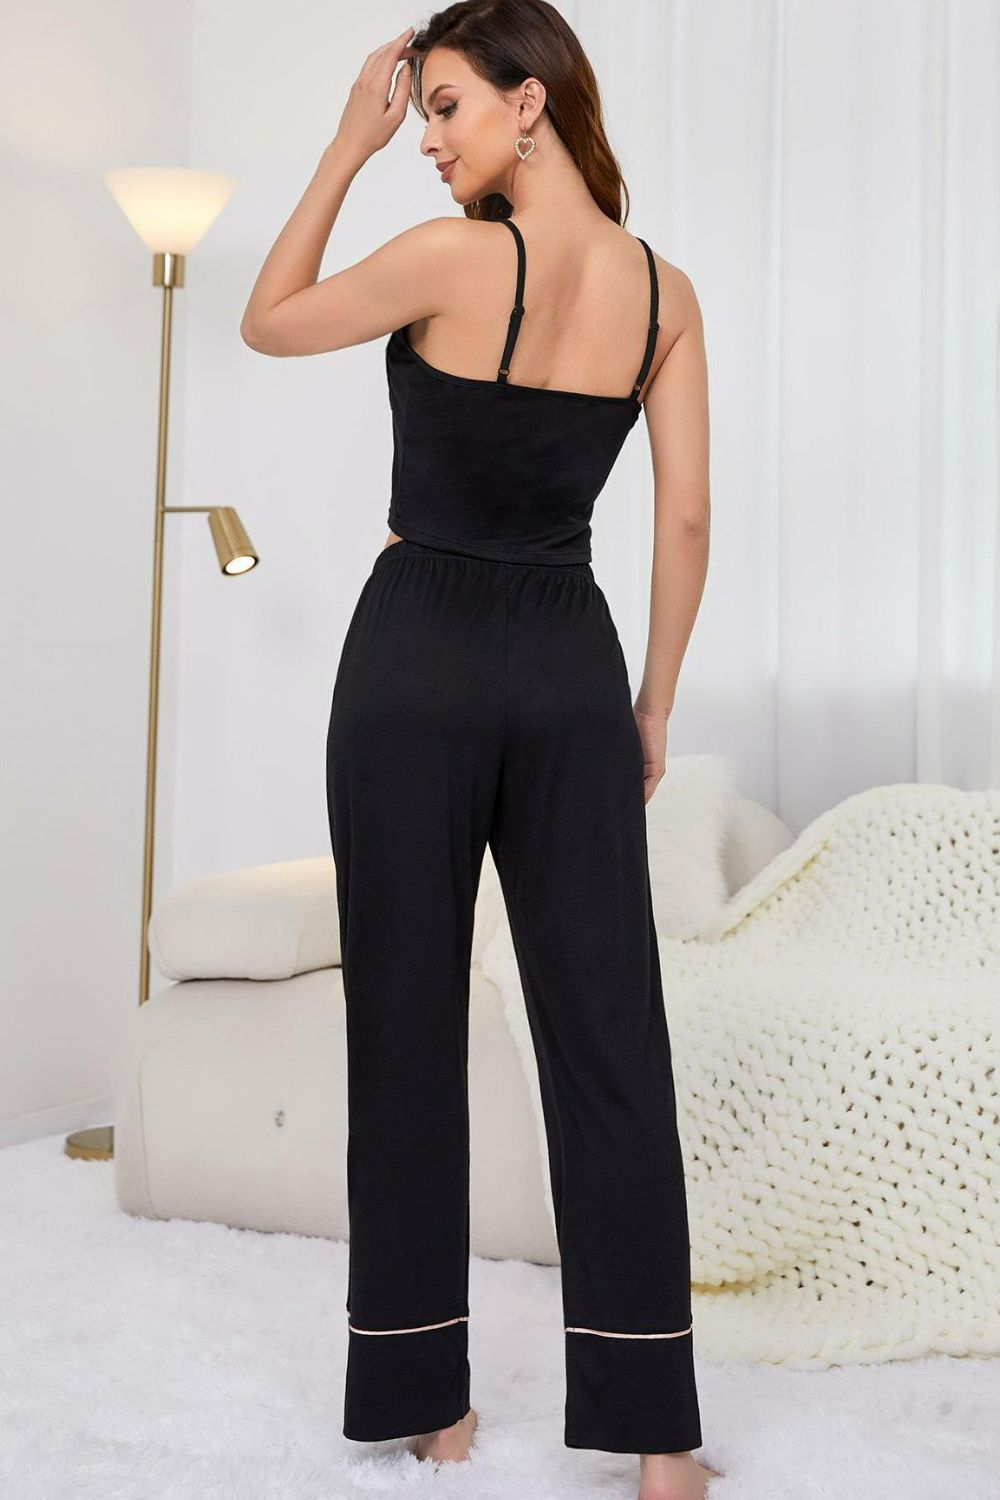 Cropped Cami and Pants Loungewear Set